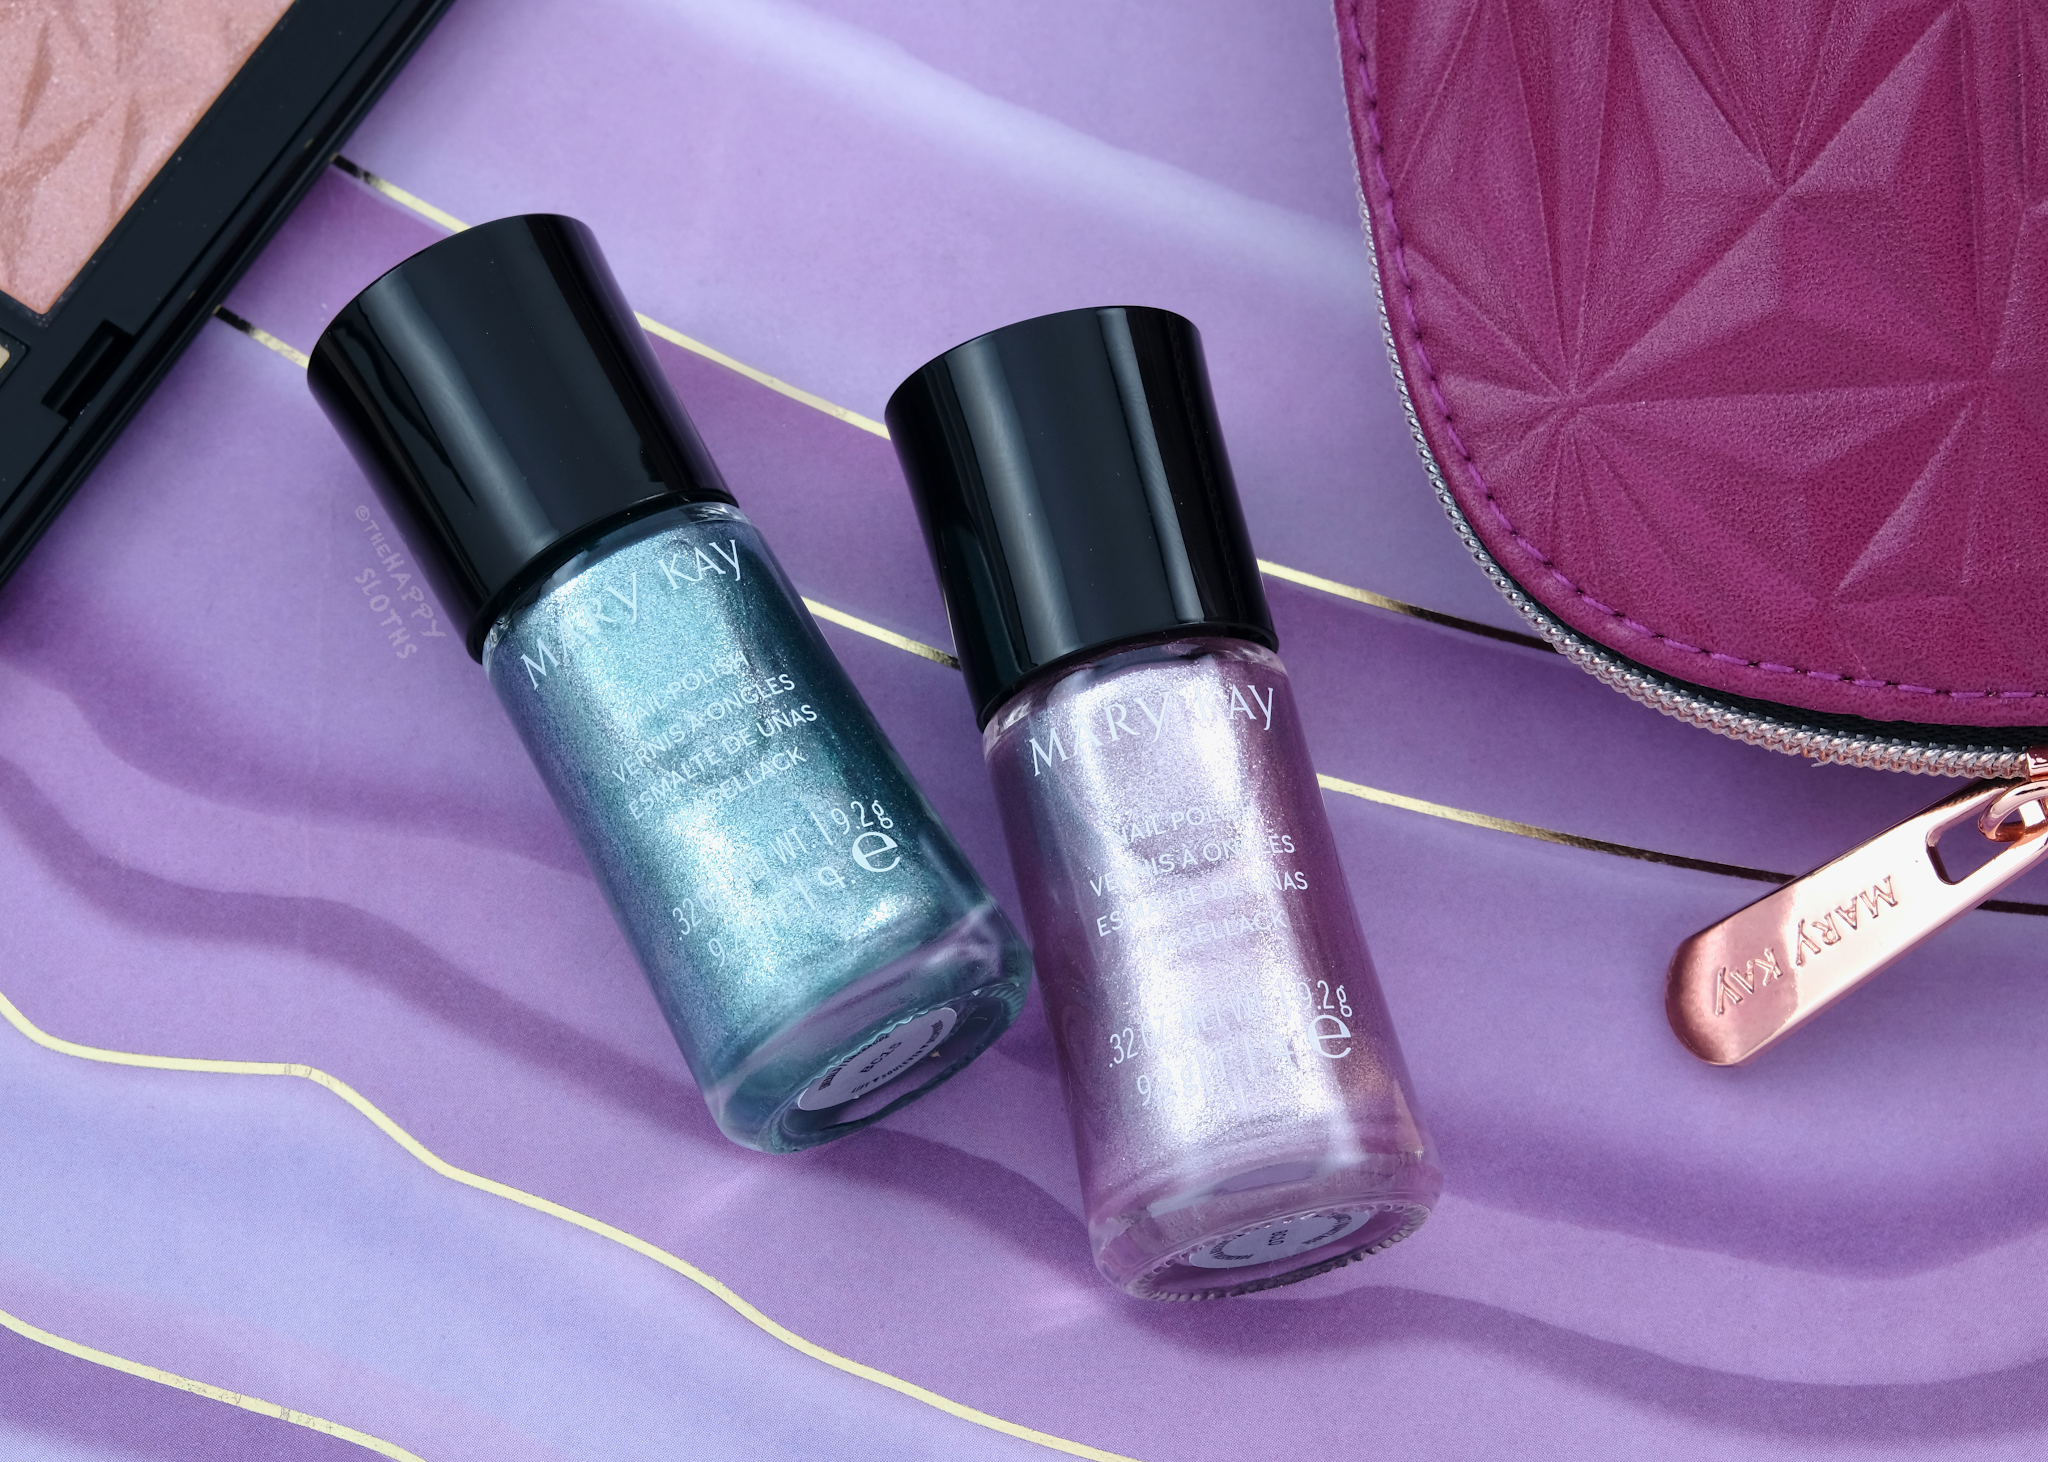 Mary Kay Fall 2021 | Nail Polish in "Emerald" & "Rose Quartz": Review and Swatches